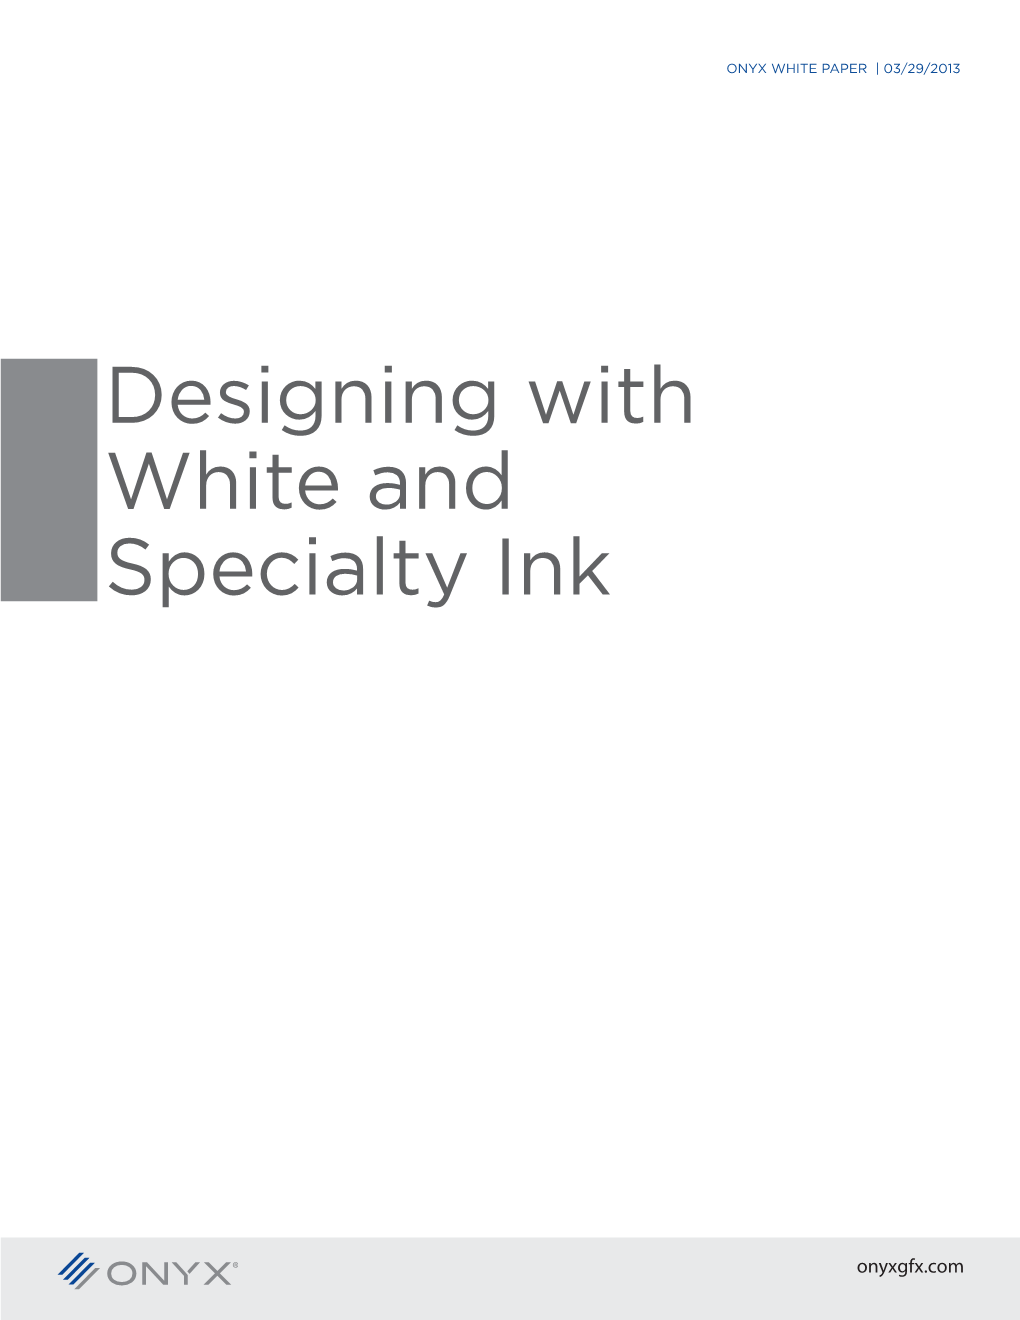 Designing with White and Specialty Ink